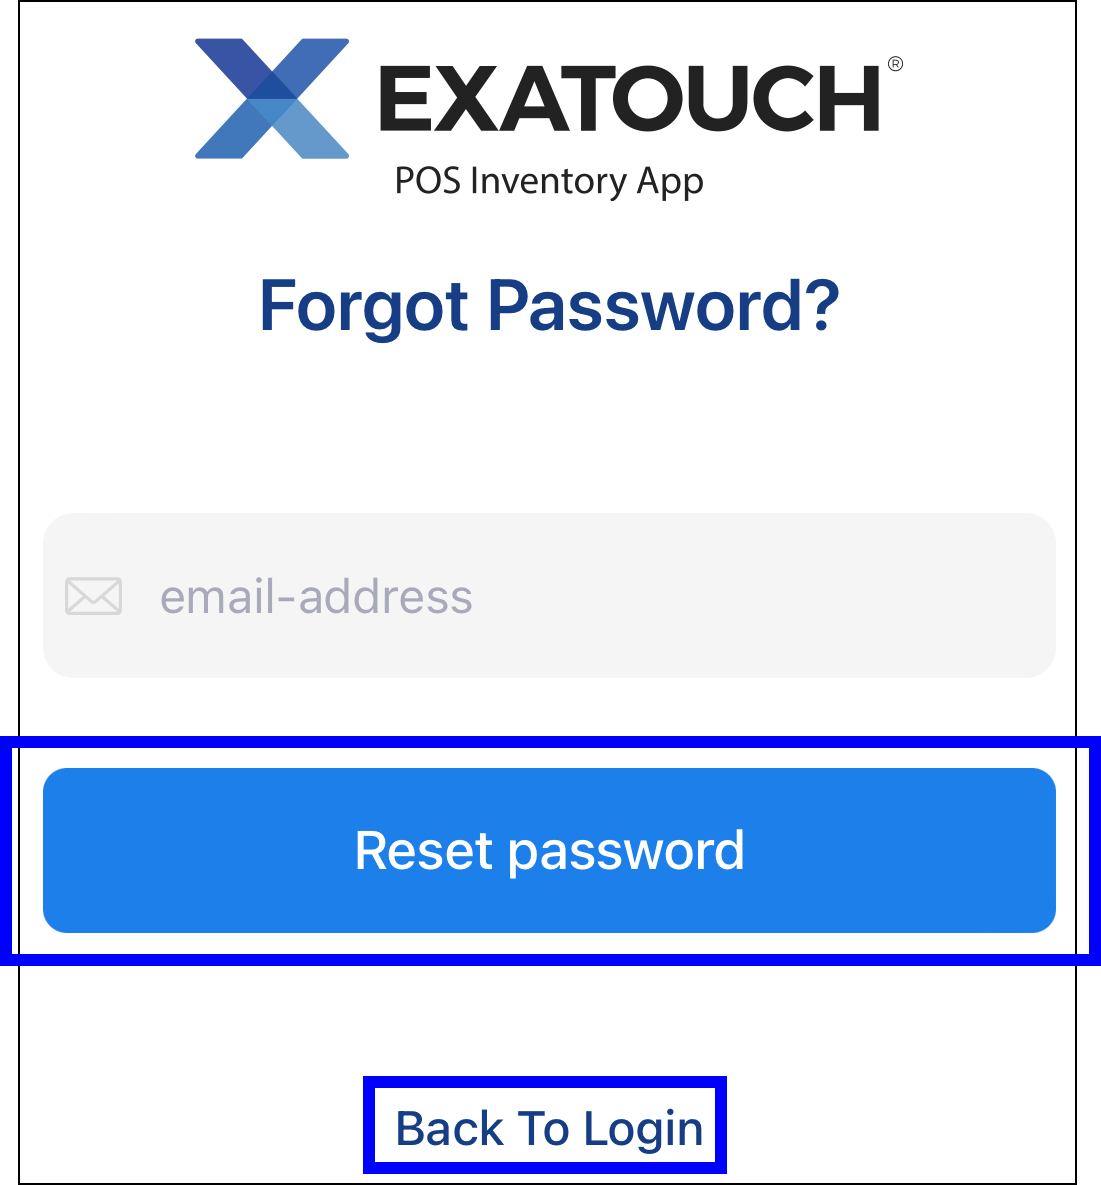 Reset password button and back to login link highlighted